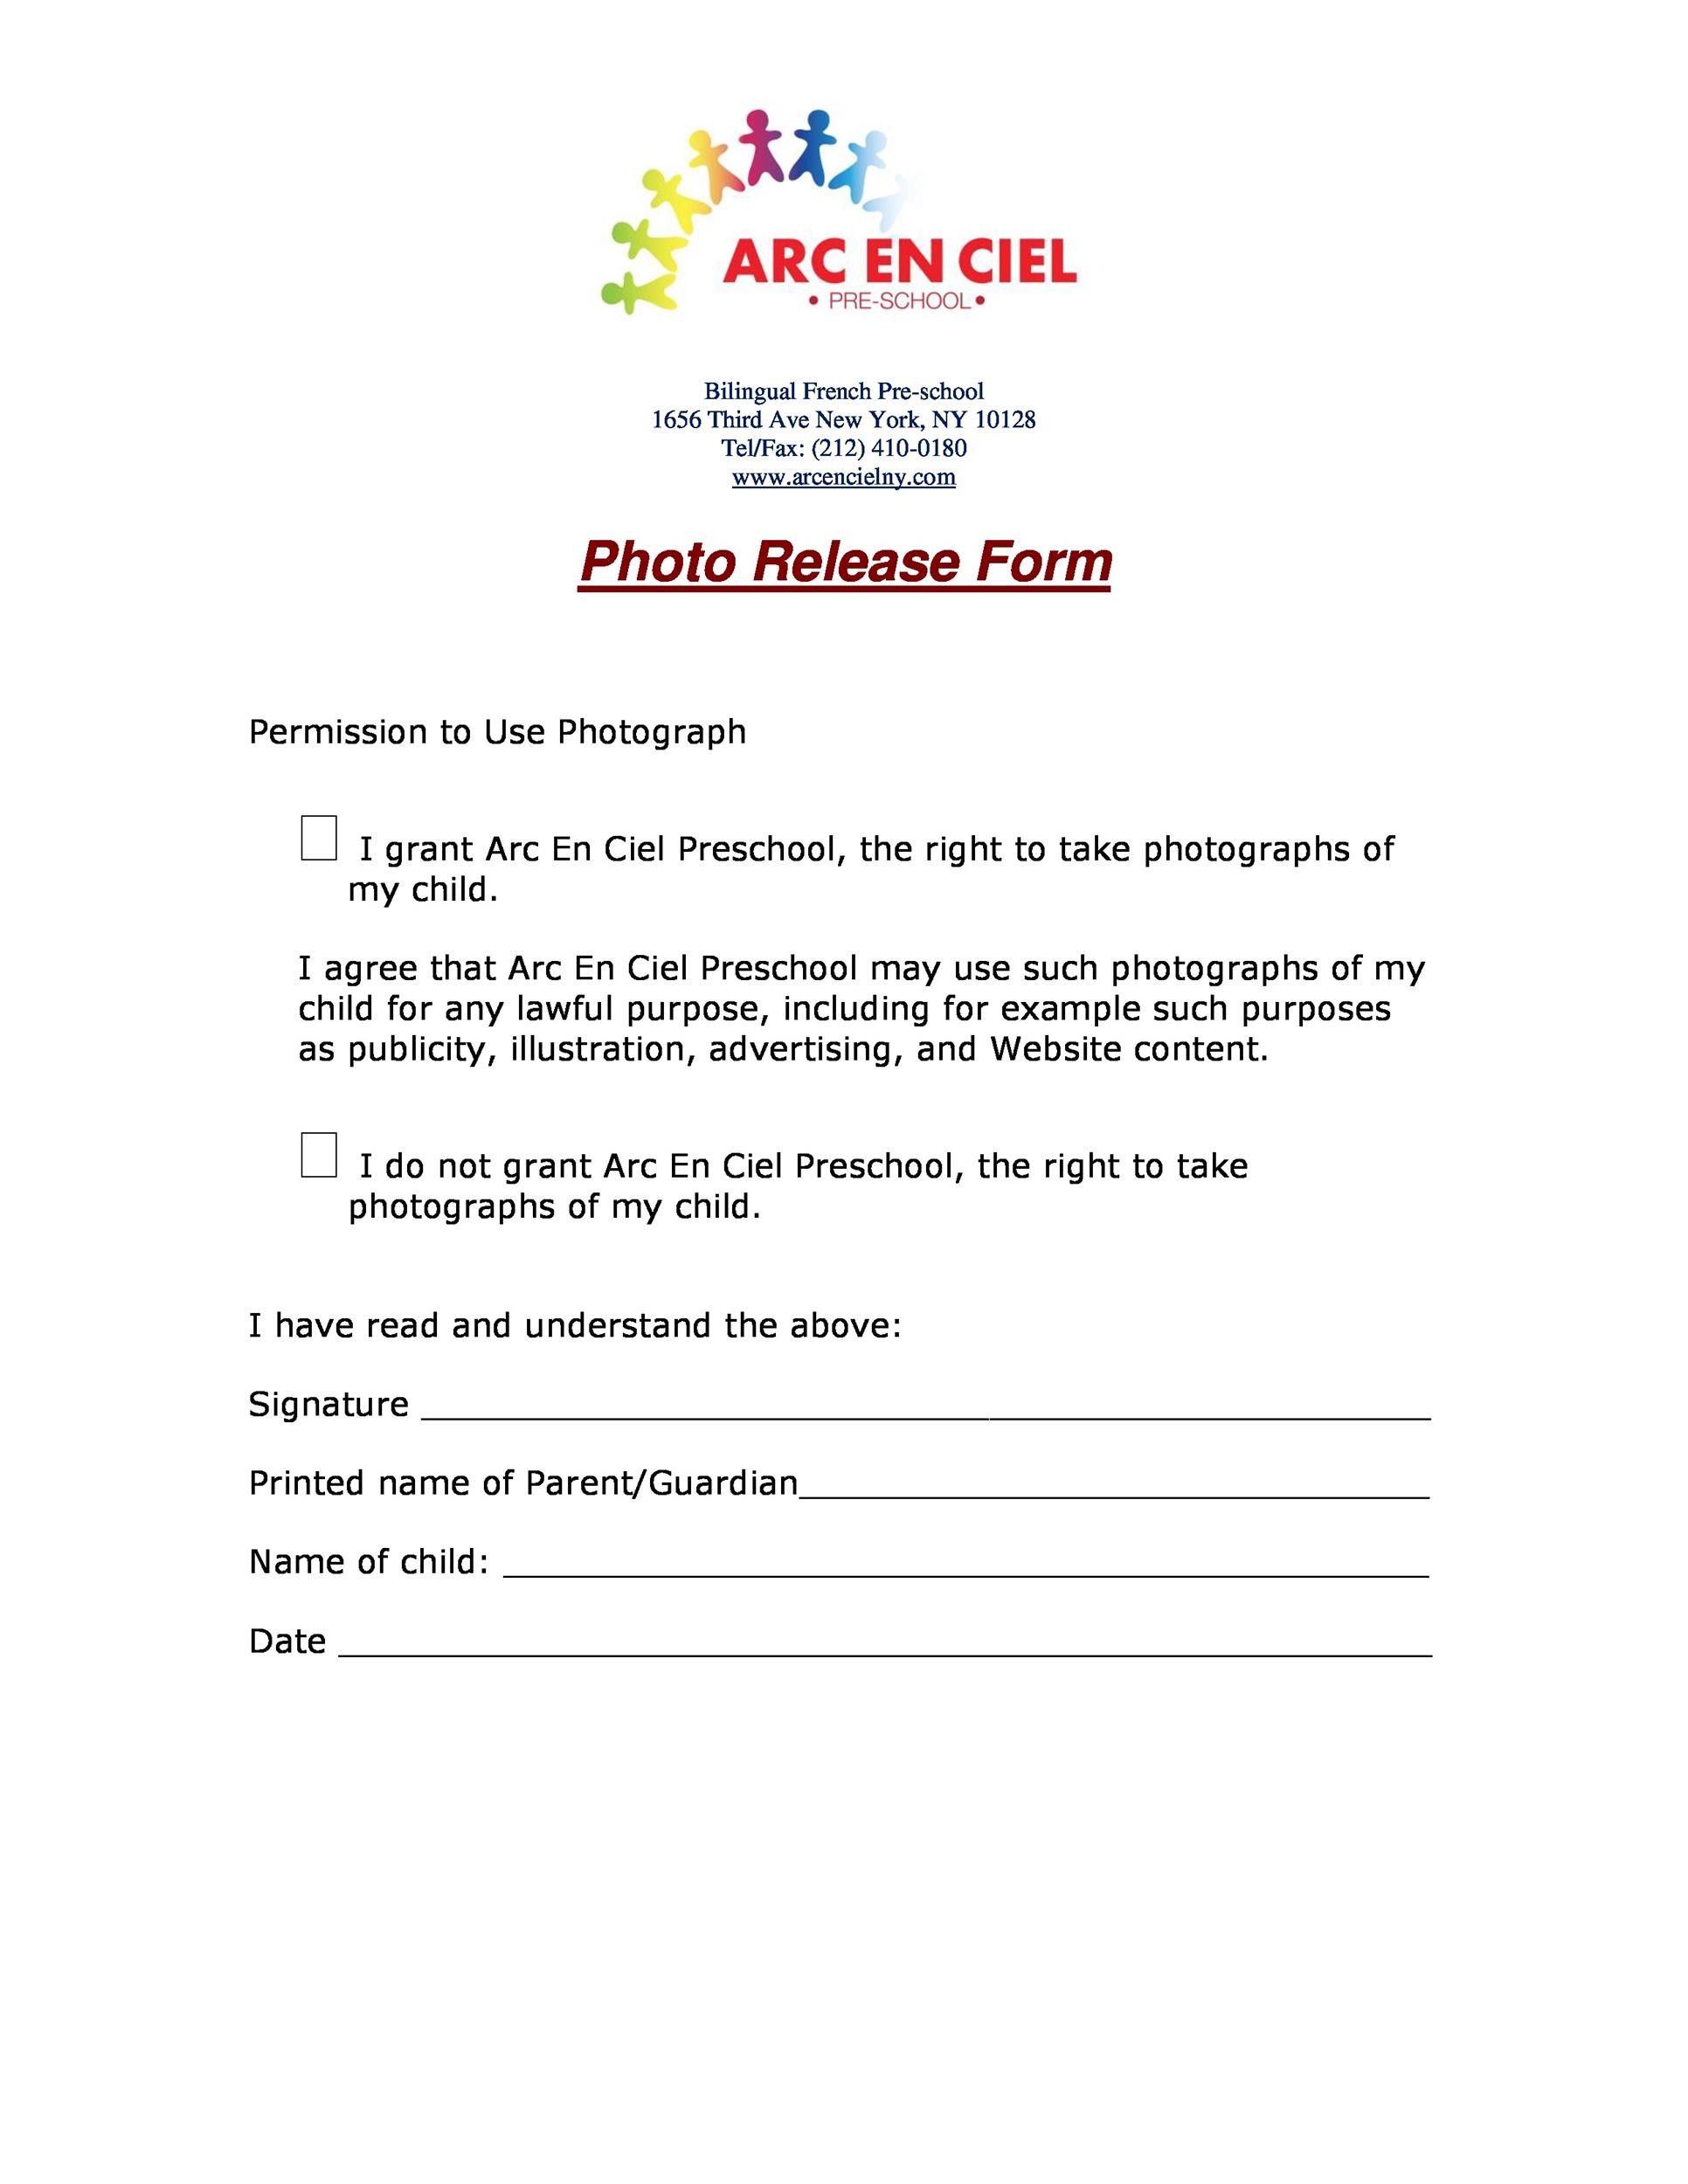 53 FREE Photo Release Form Templates Word PDF Template Lab